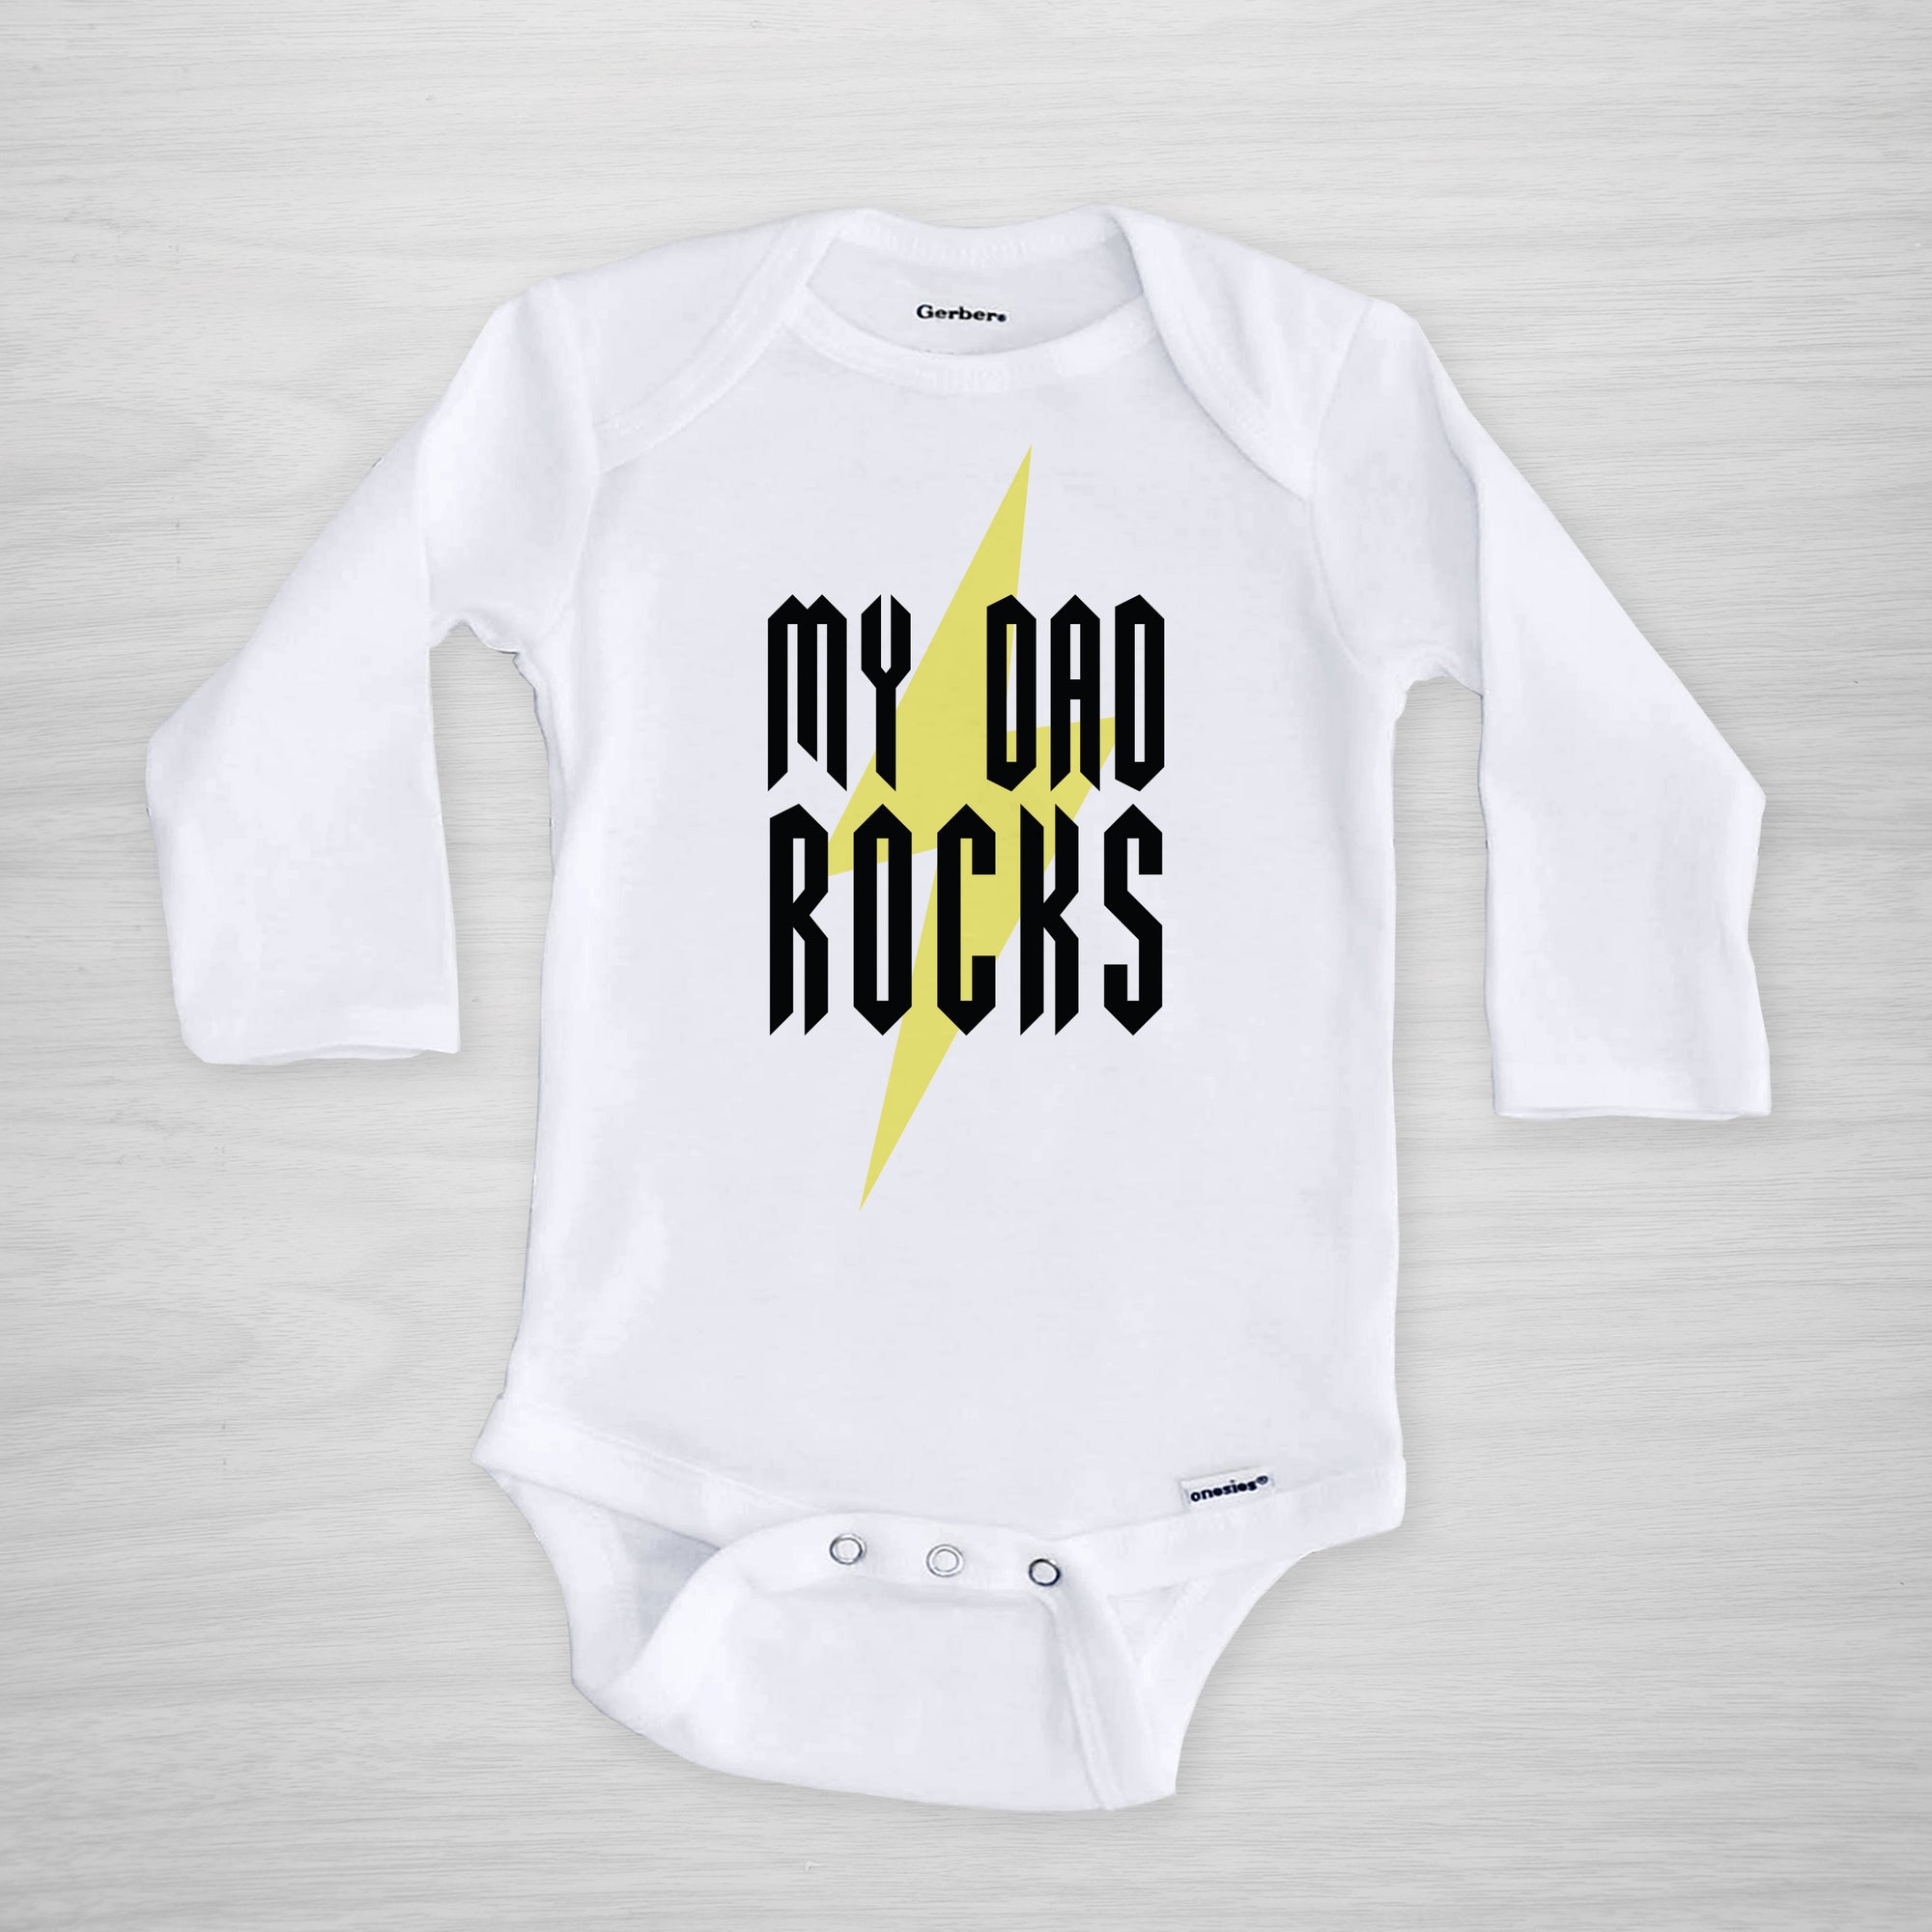 My Dad Rocks onesie, perfect to celebrate your music loving dad on Father's Day, short sleeved